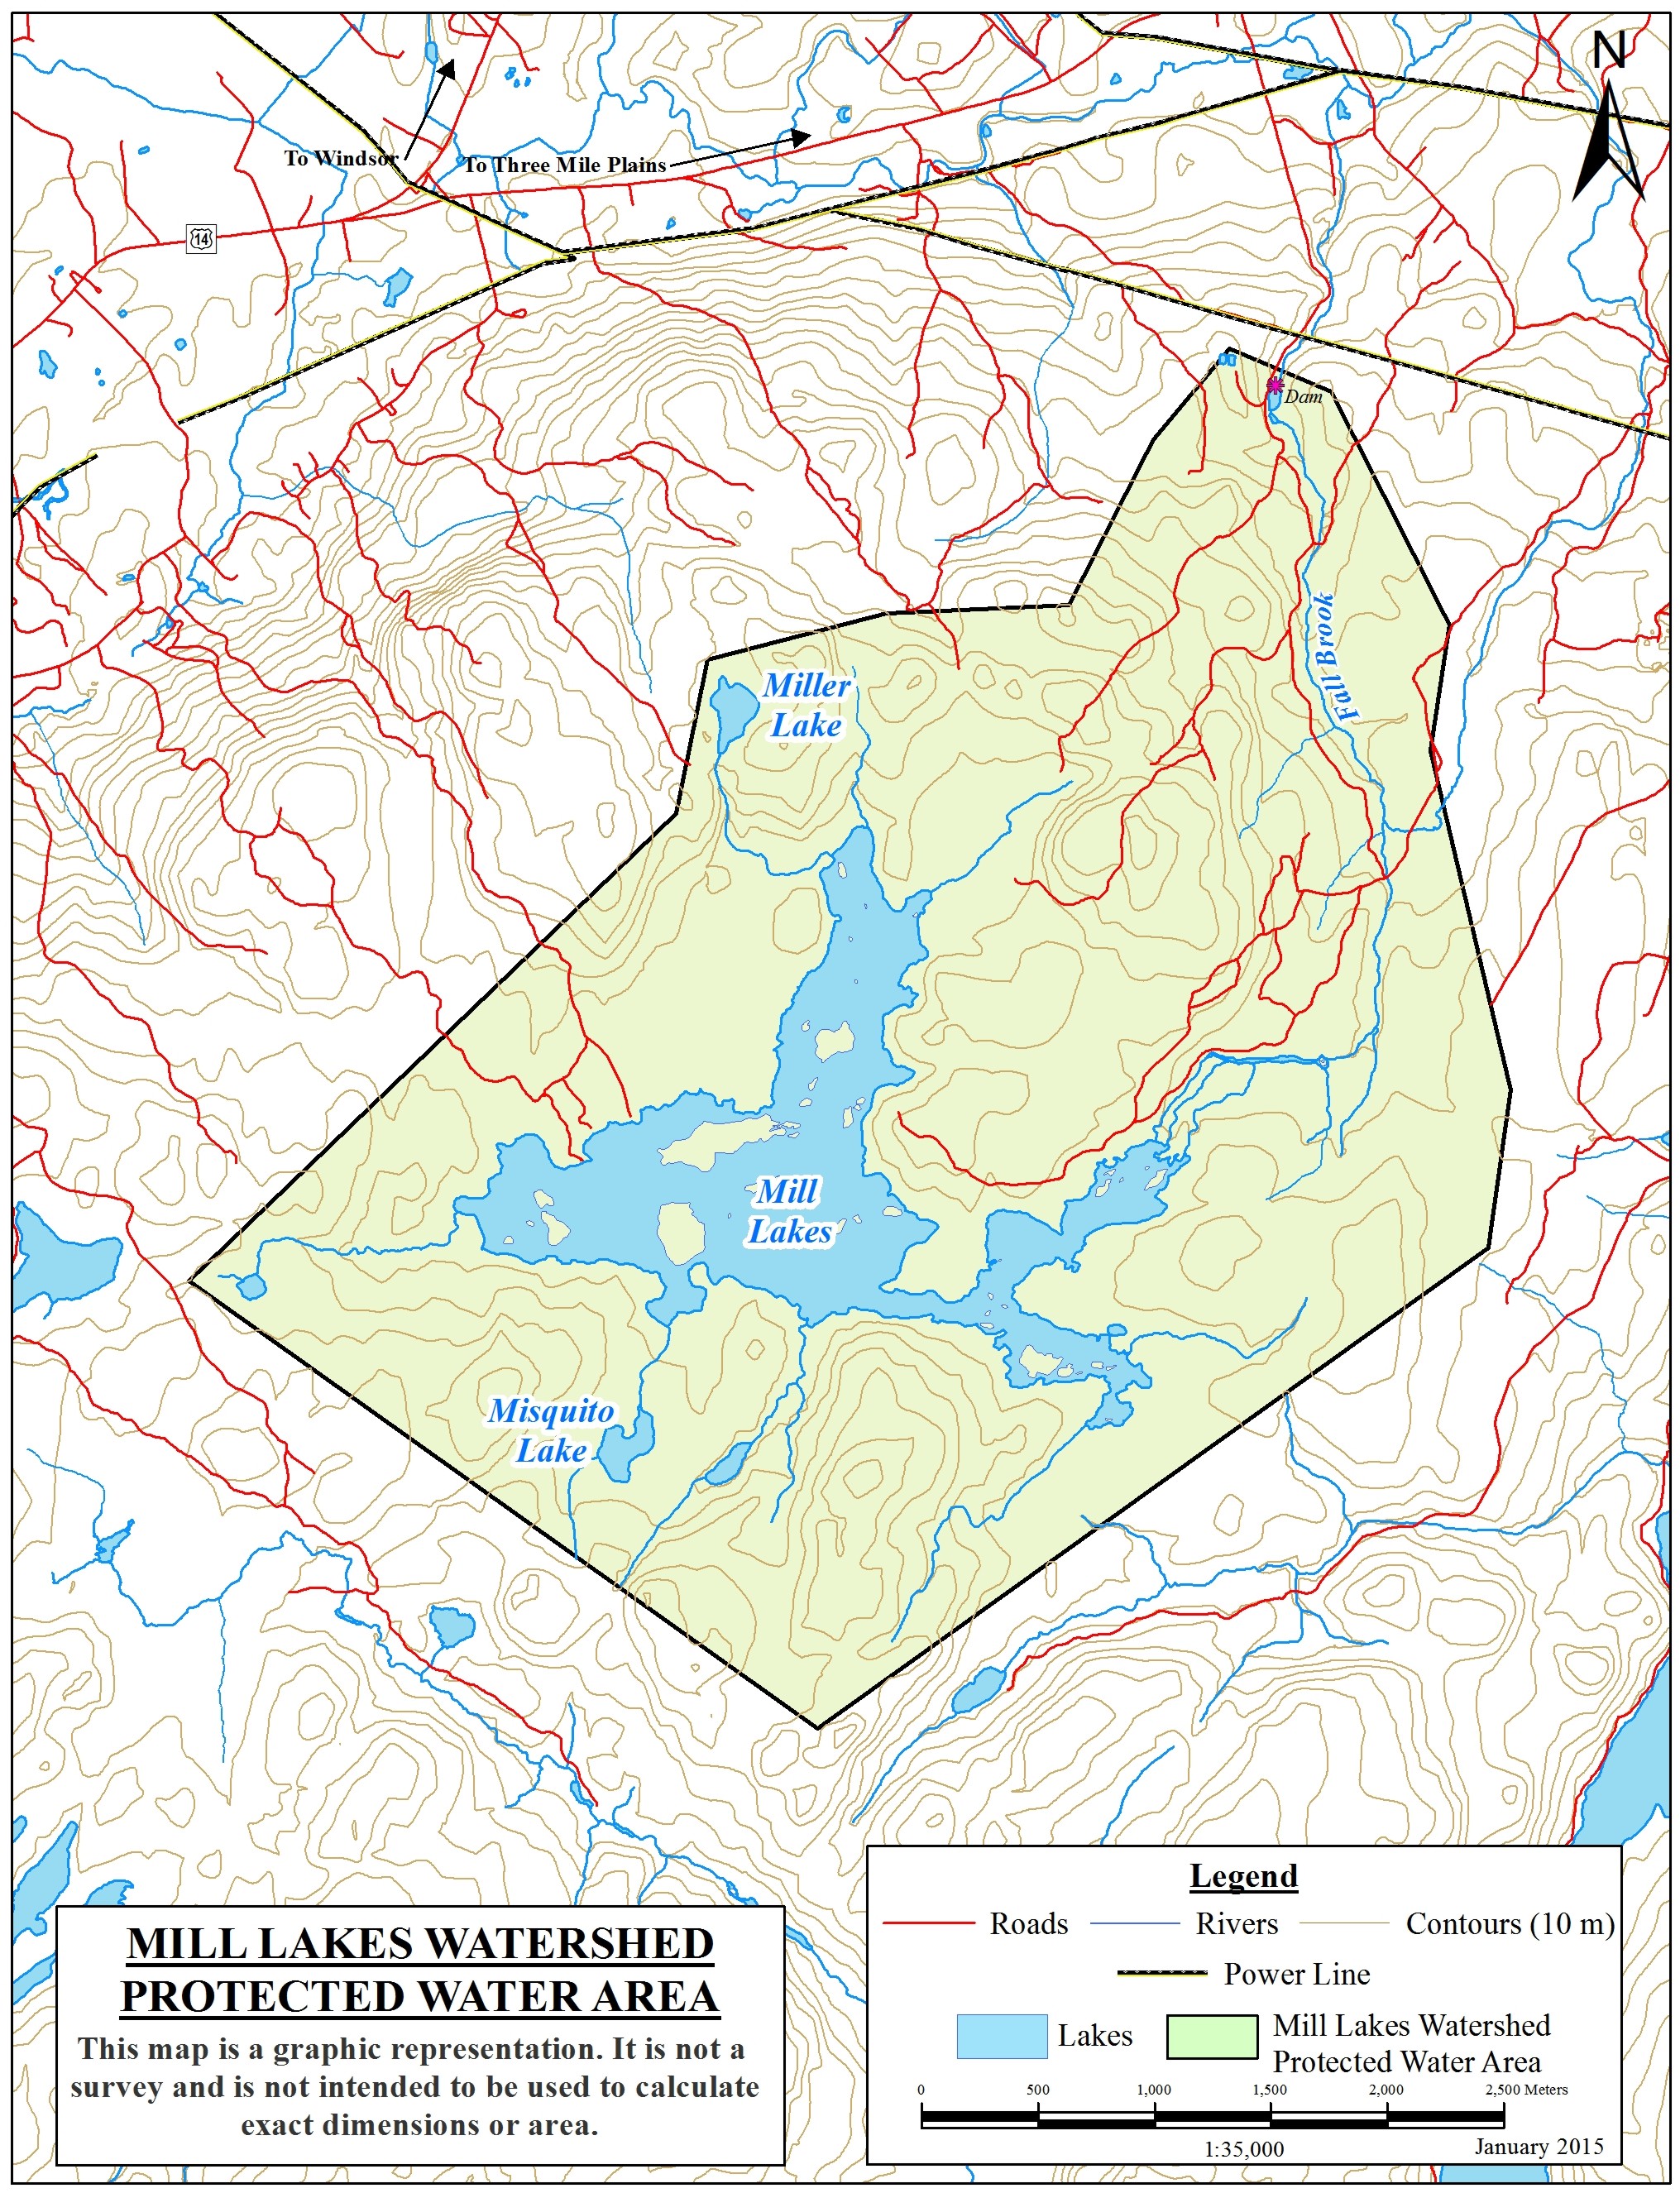 Mill Lakes Watershed Protected Water Area